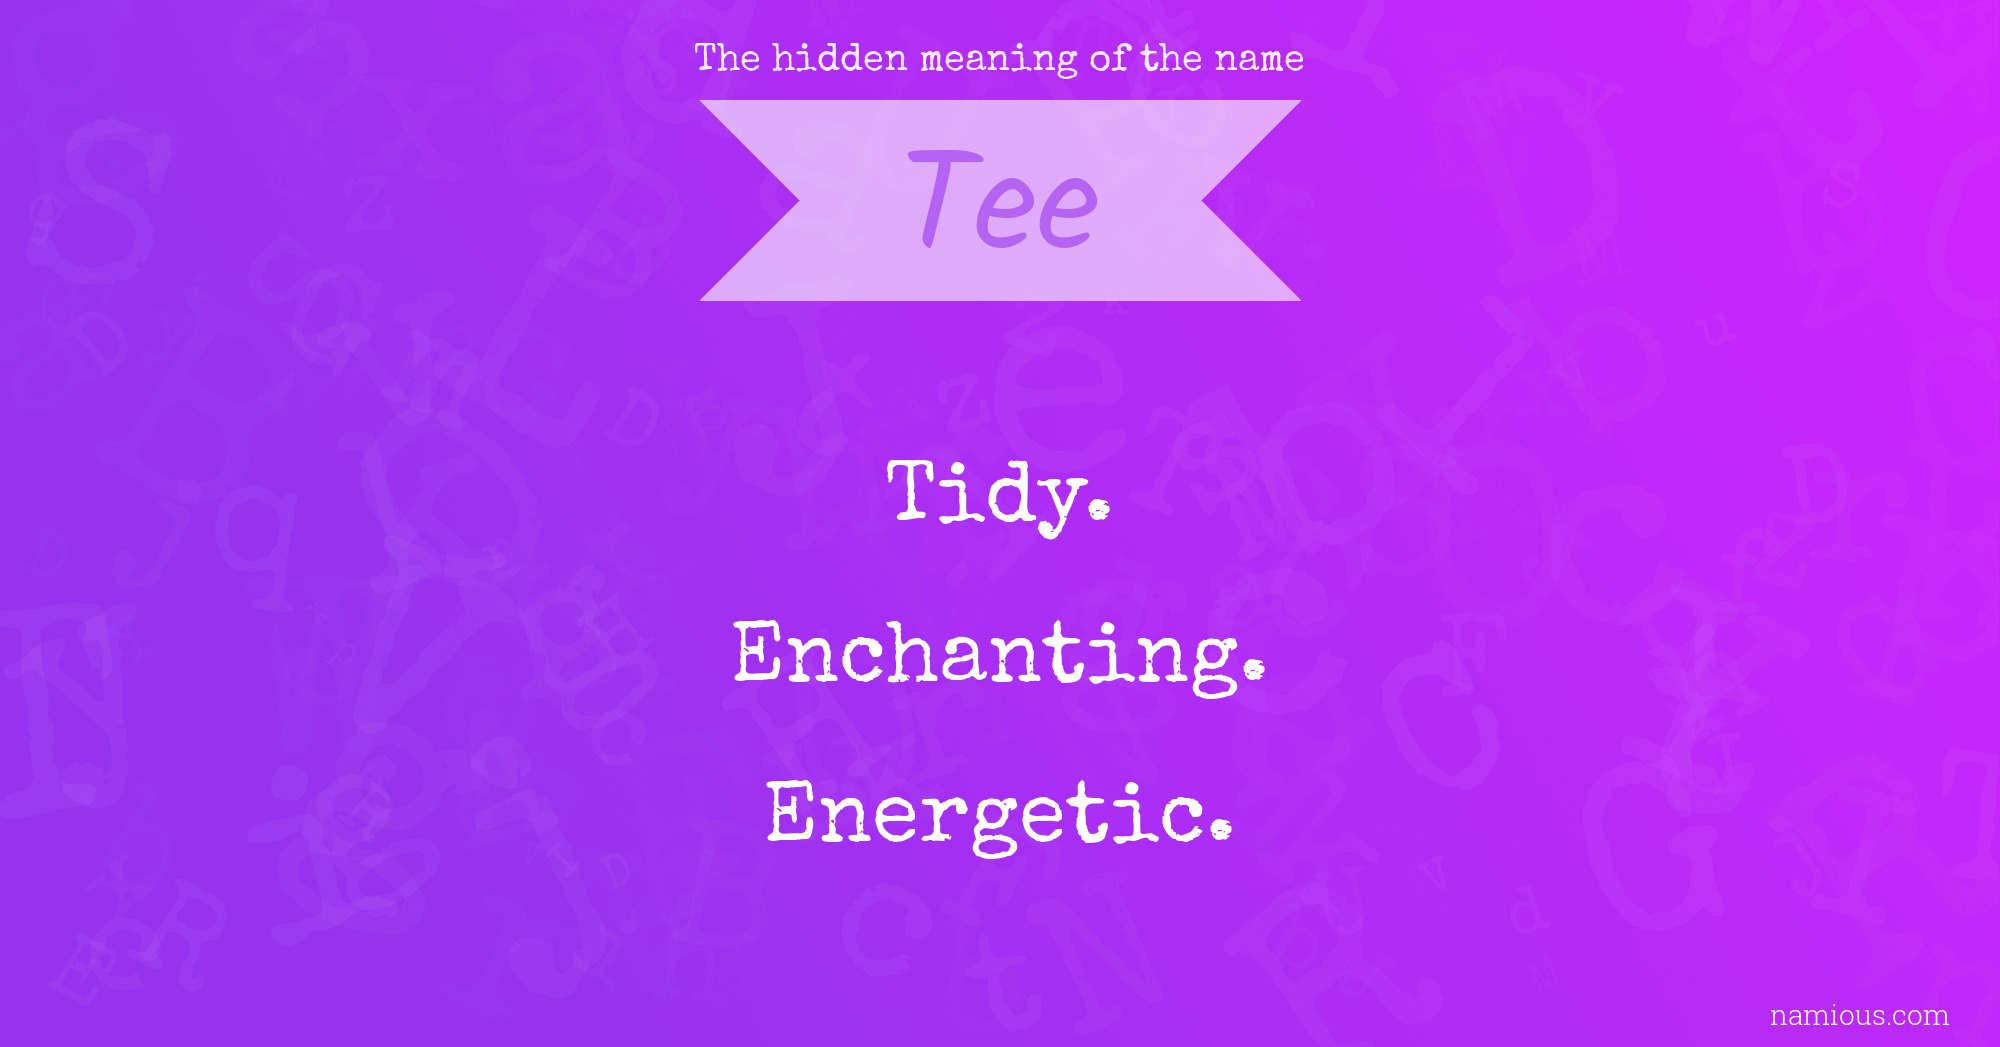 The hidden meaning of the name Tee